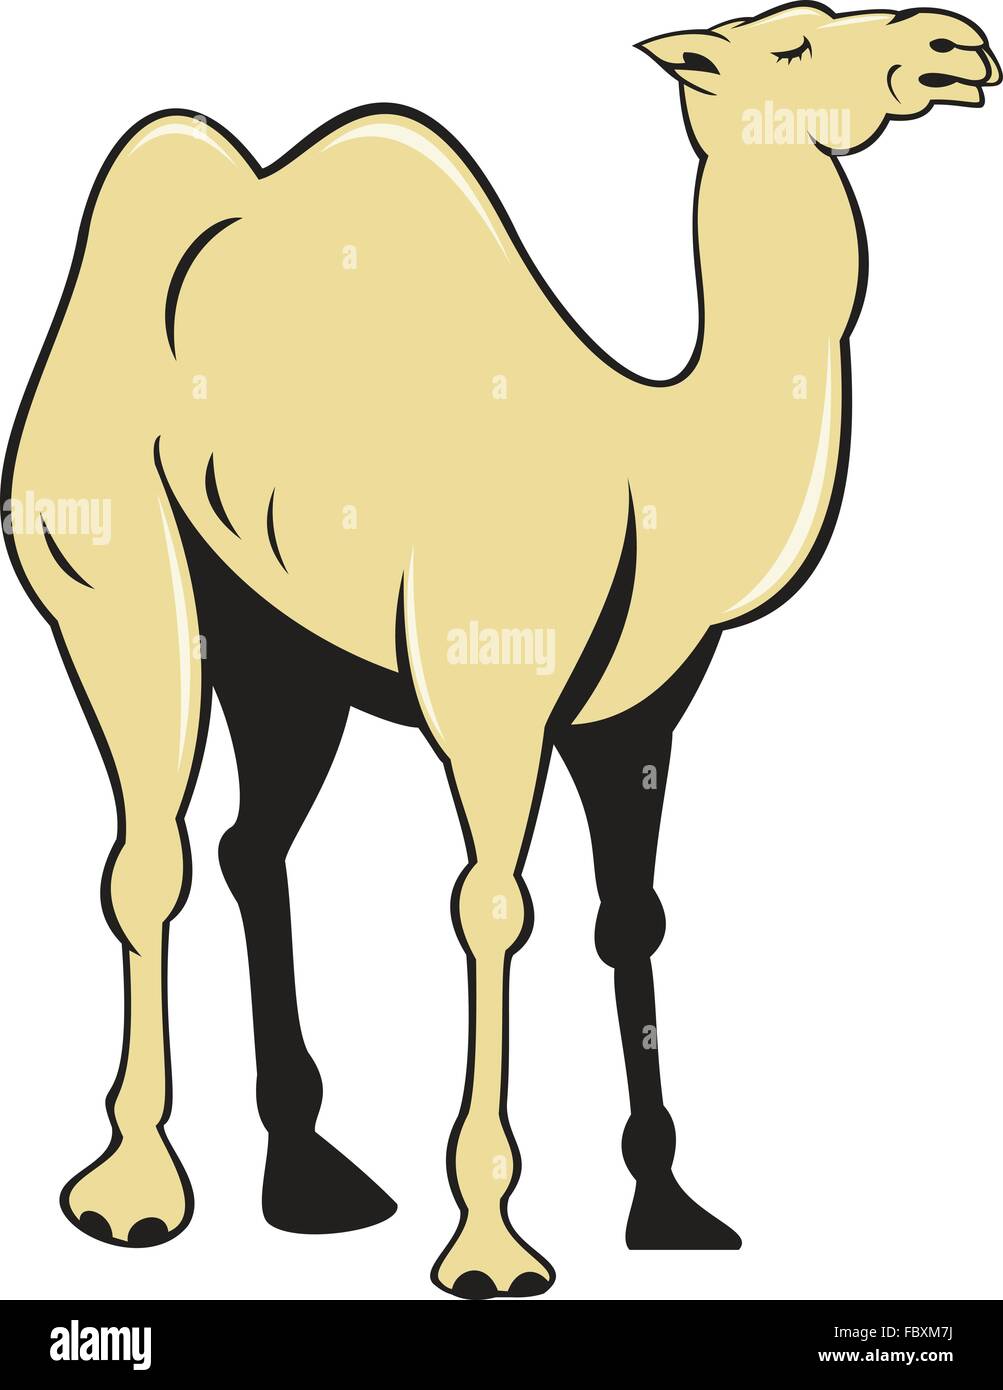 Illustration of a camel viewed from the side set on isolated white background done in cartoon style. Stock Vector